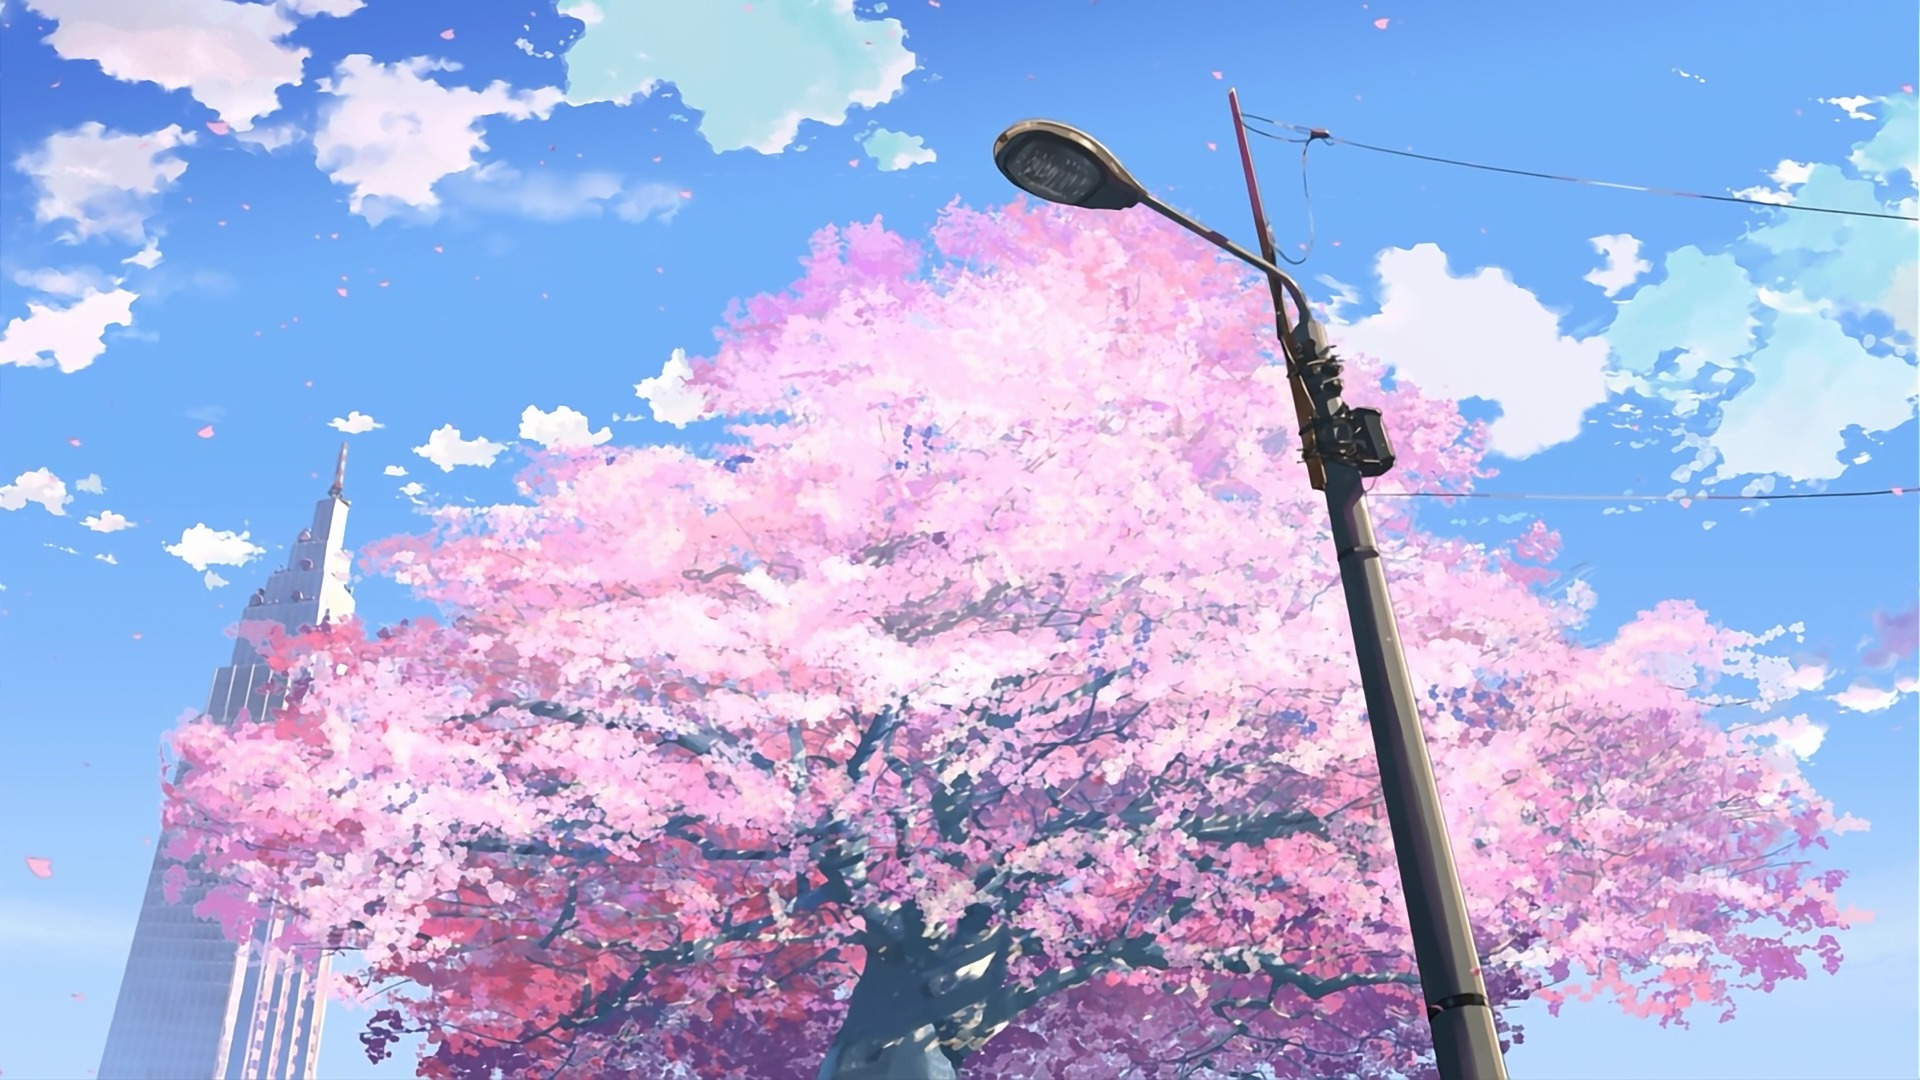 Anime 1920x1080 5 Centimeters Per Second city trees anime pink sky